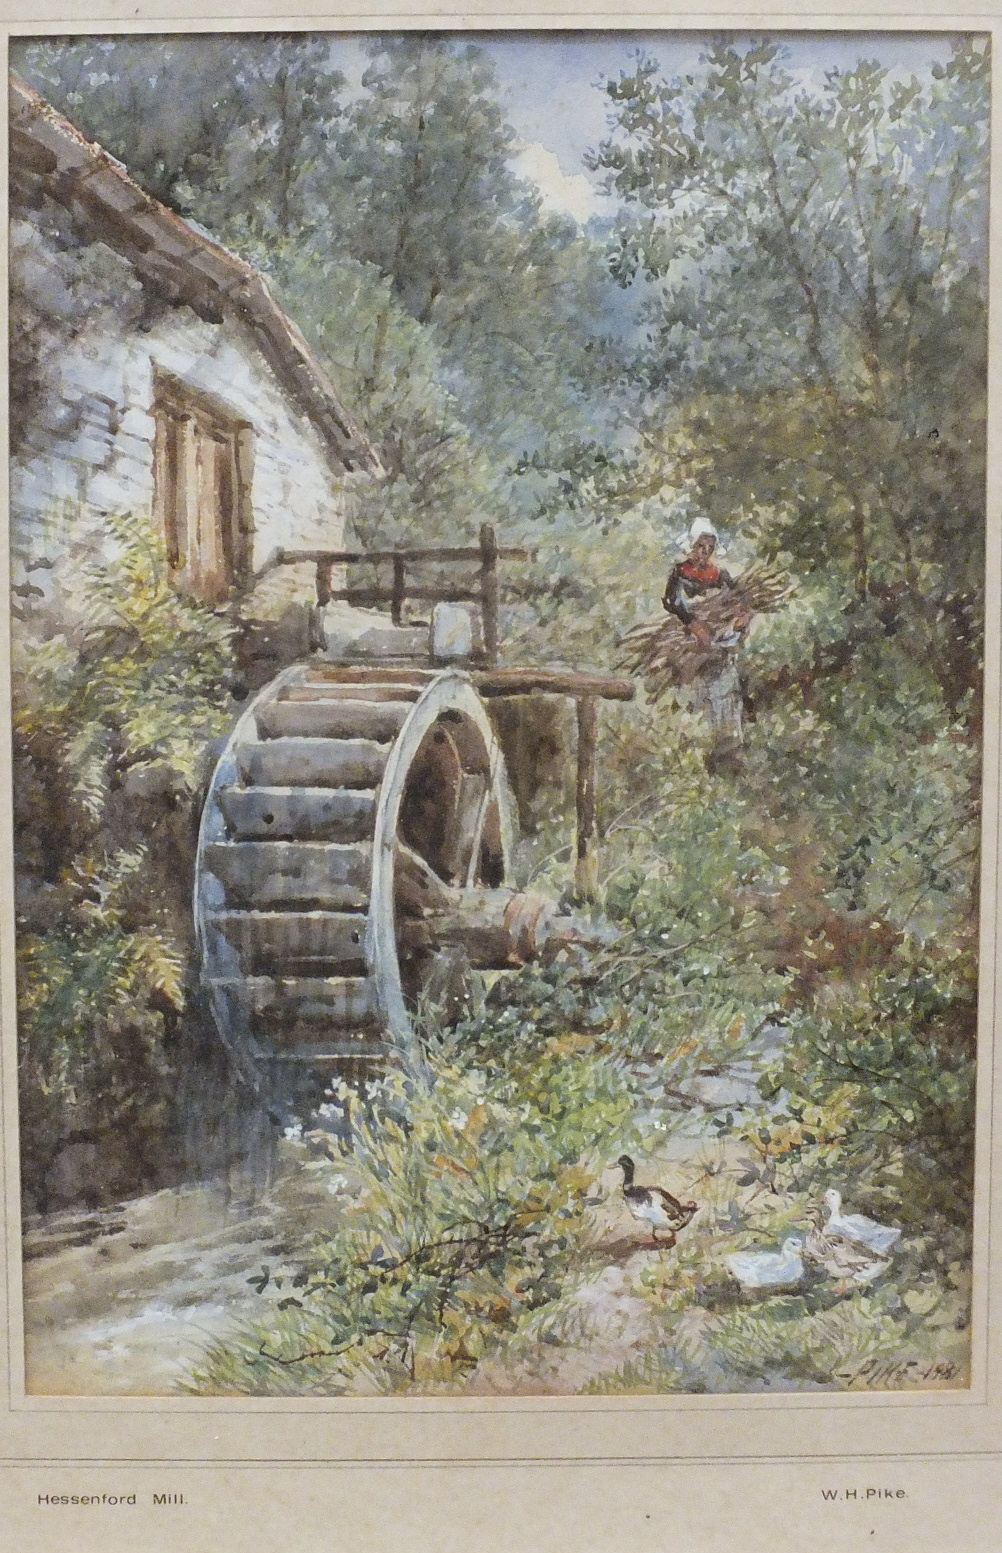 William Henry Pike (1846-1908) HESSENFORD MILL Signed watercolour, dated 1881, titled on mount, 34 x - Image 2 of 3